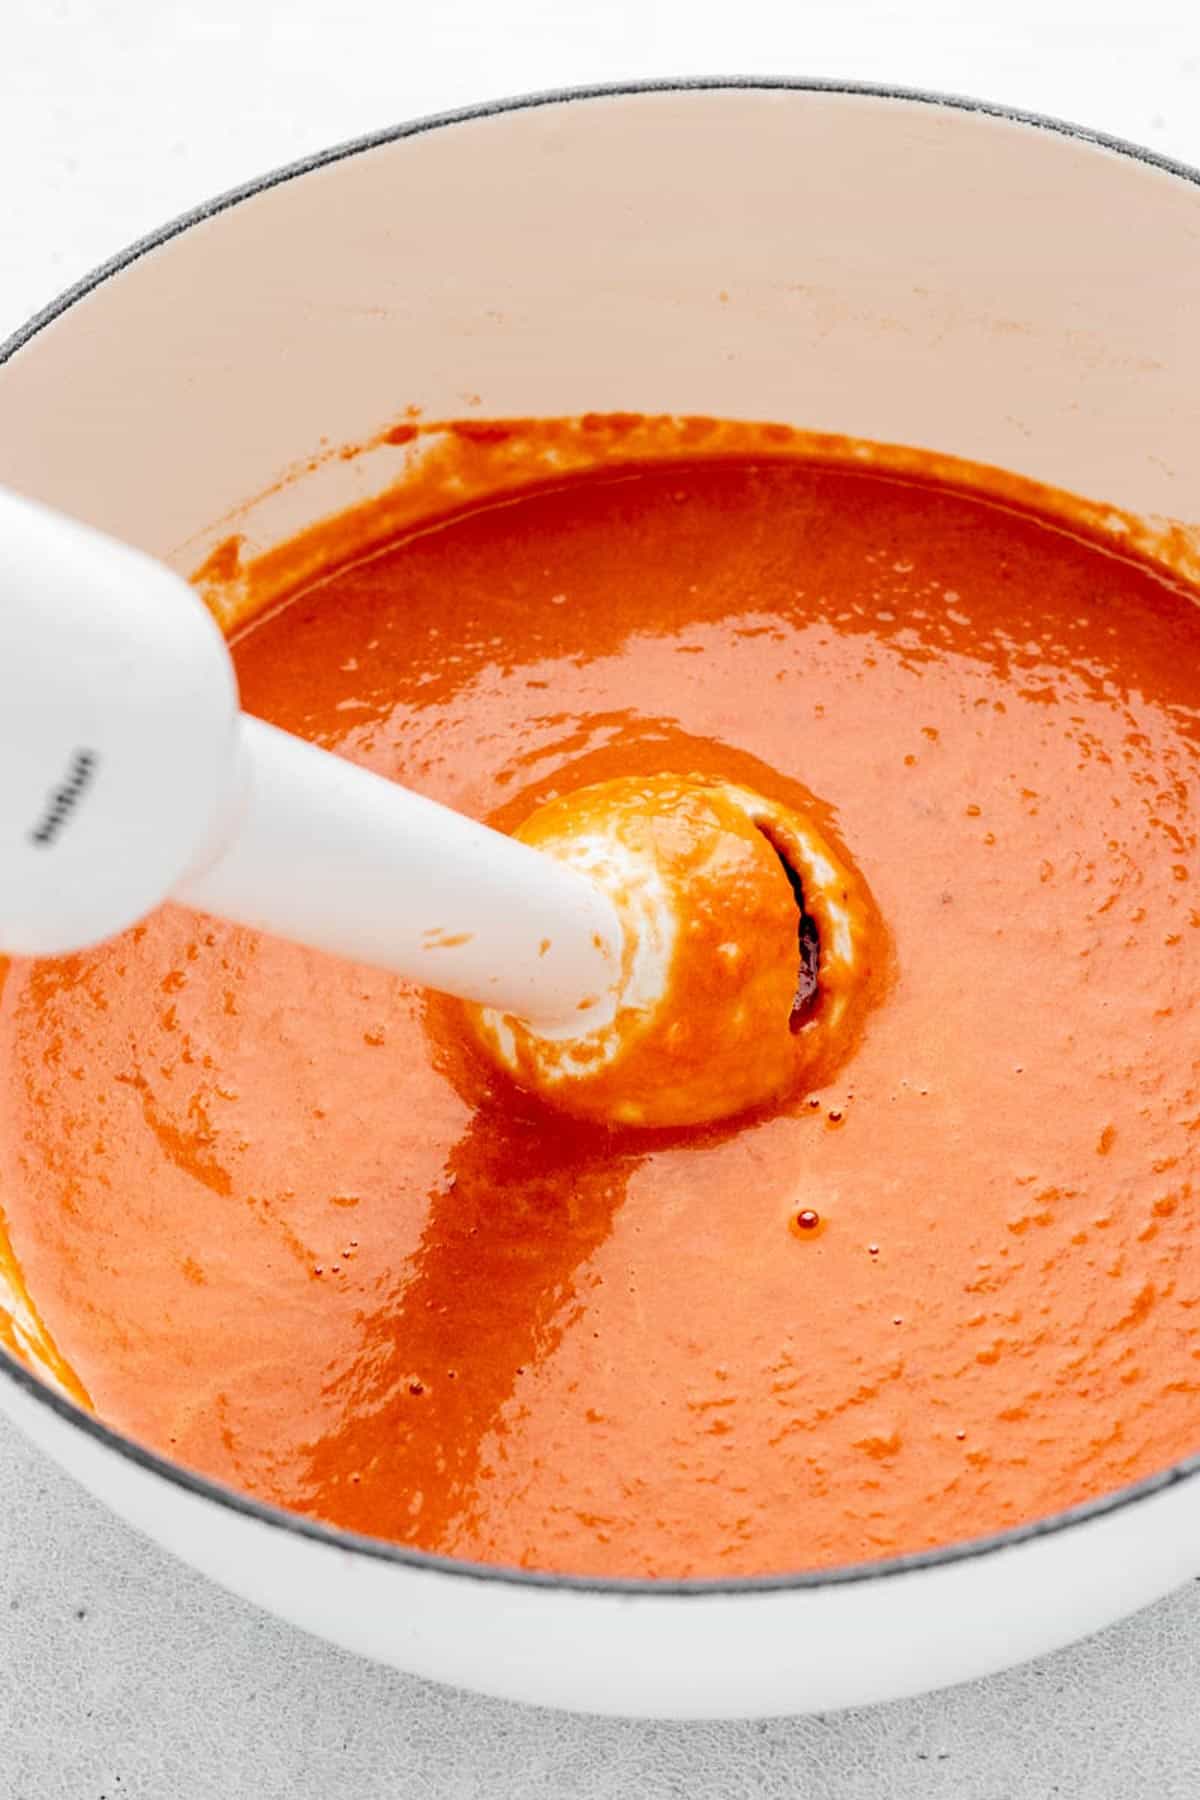 An immersion blender blending the tomato onion soup in the sauce pan.